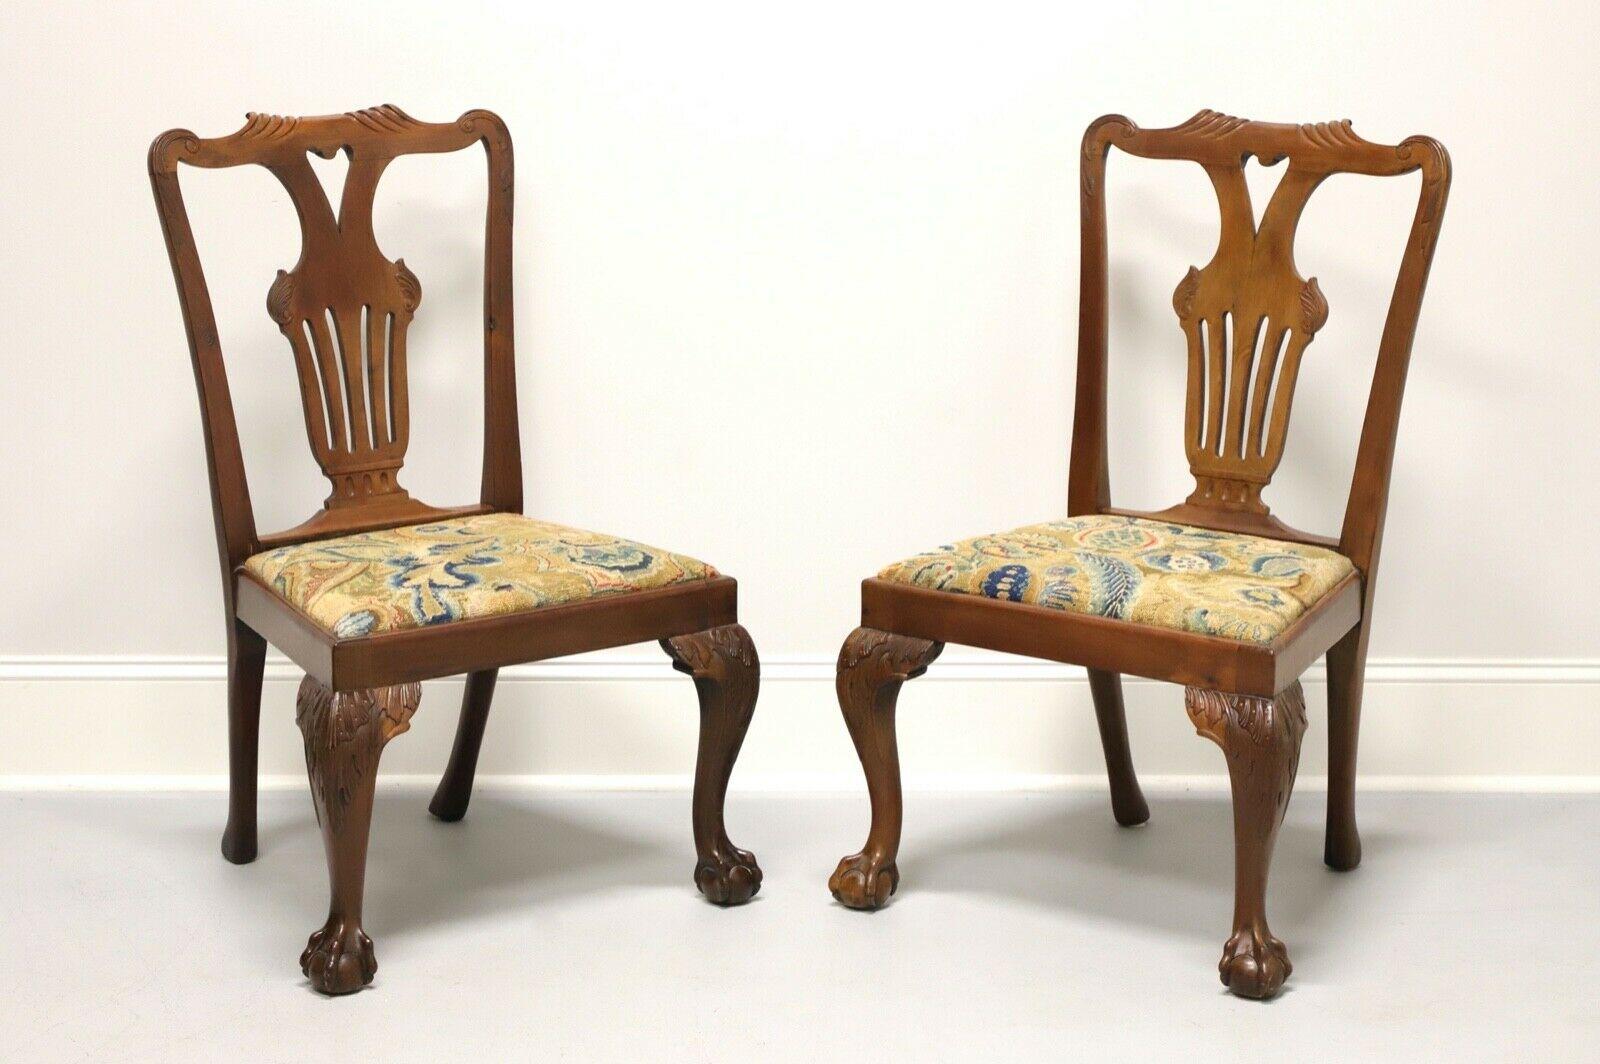 Antique 19th Century Carved Walnut Chippendale Ball n Claw Dining Chairs - Pair For Sale 4